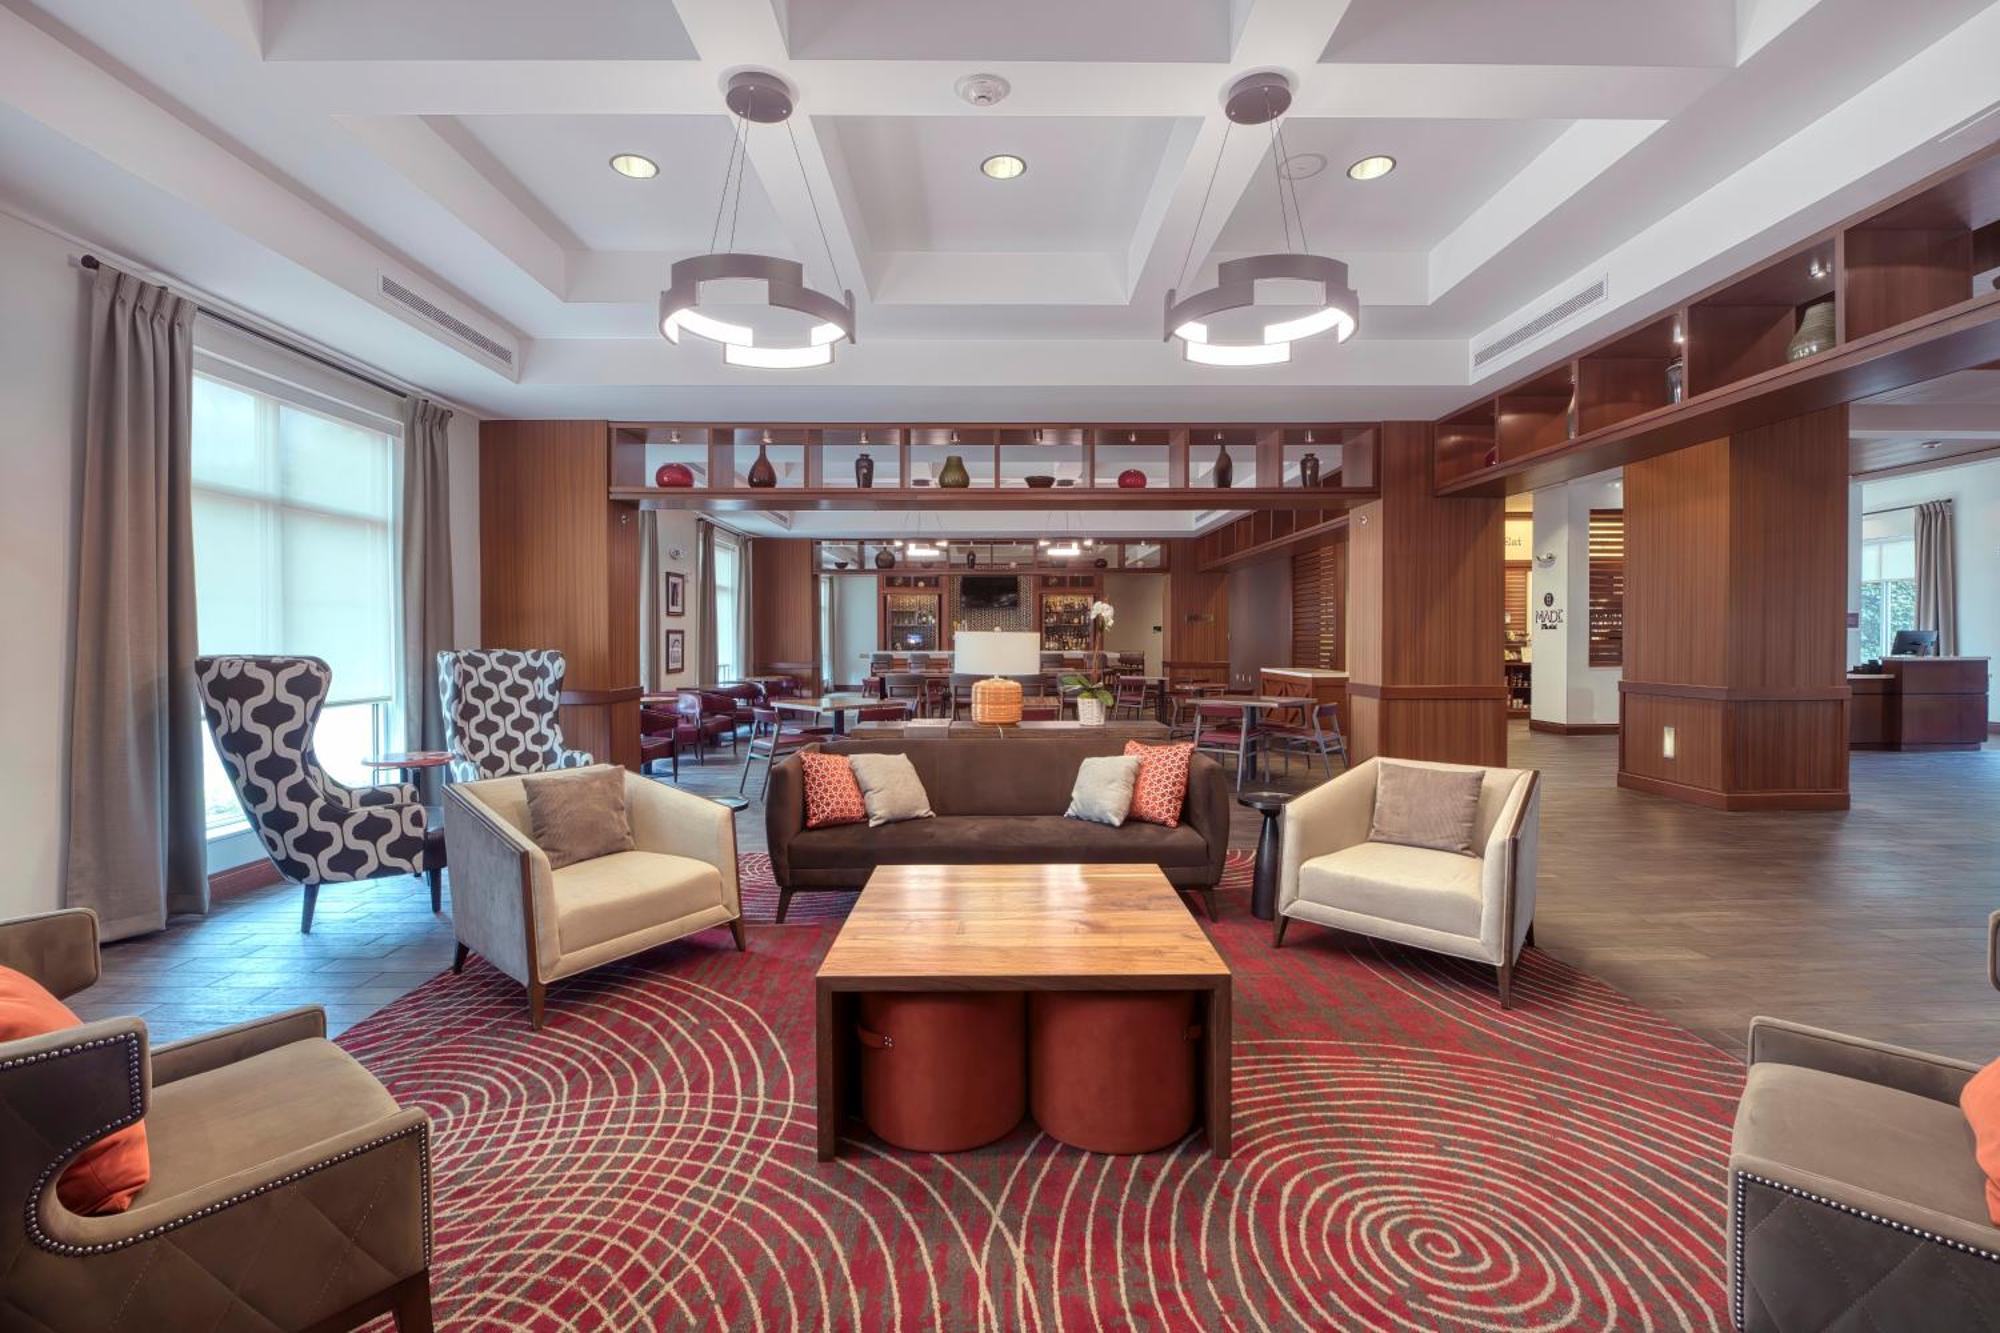 Hotel Doubletree By Hilton Raleigh-Cary Exteriér fotografie